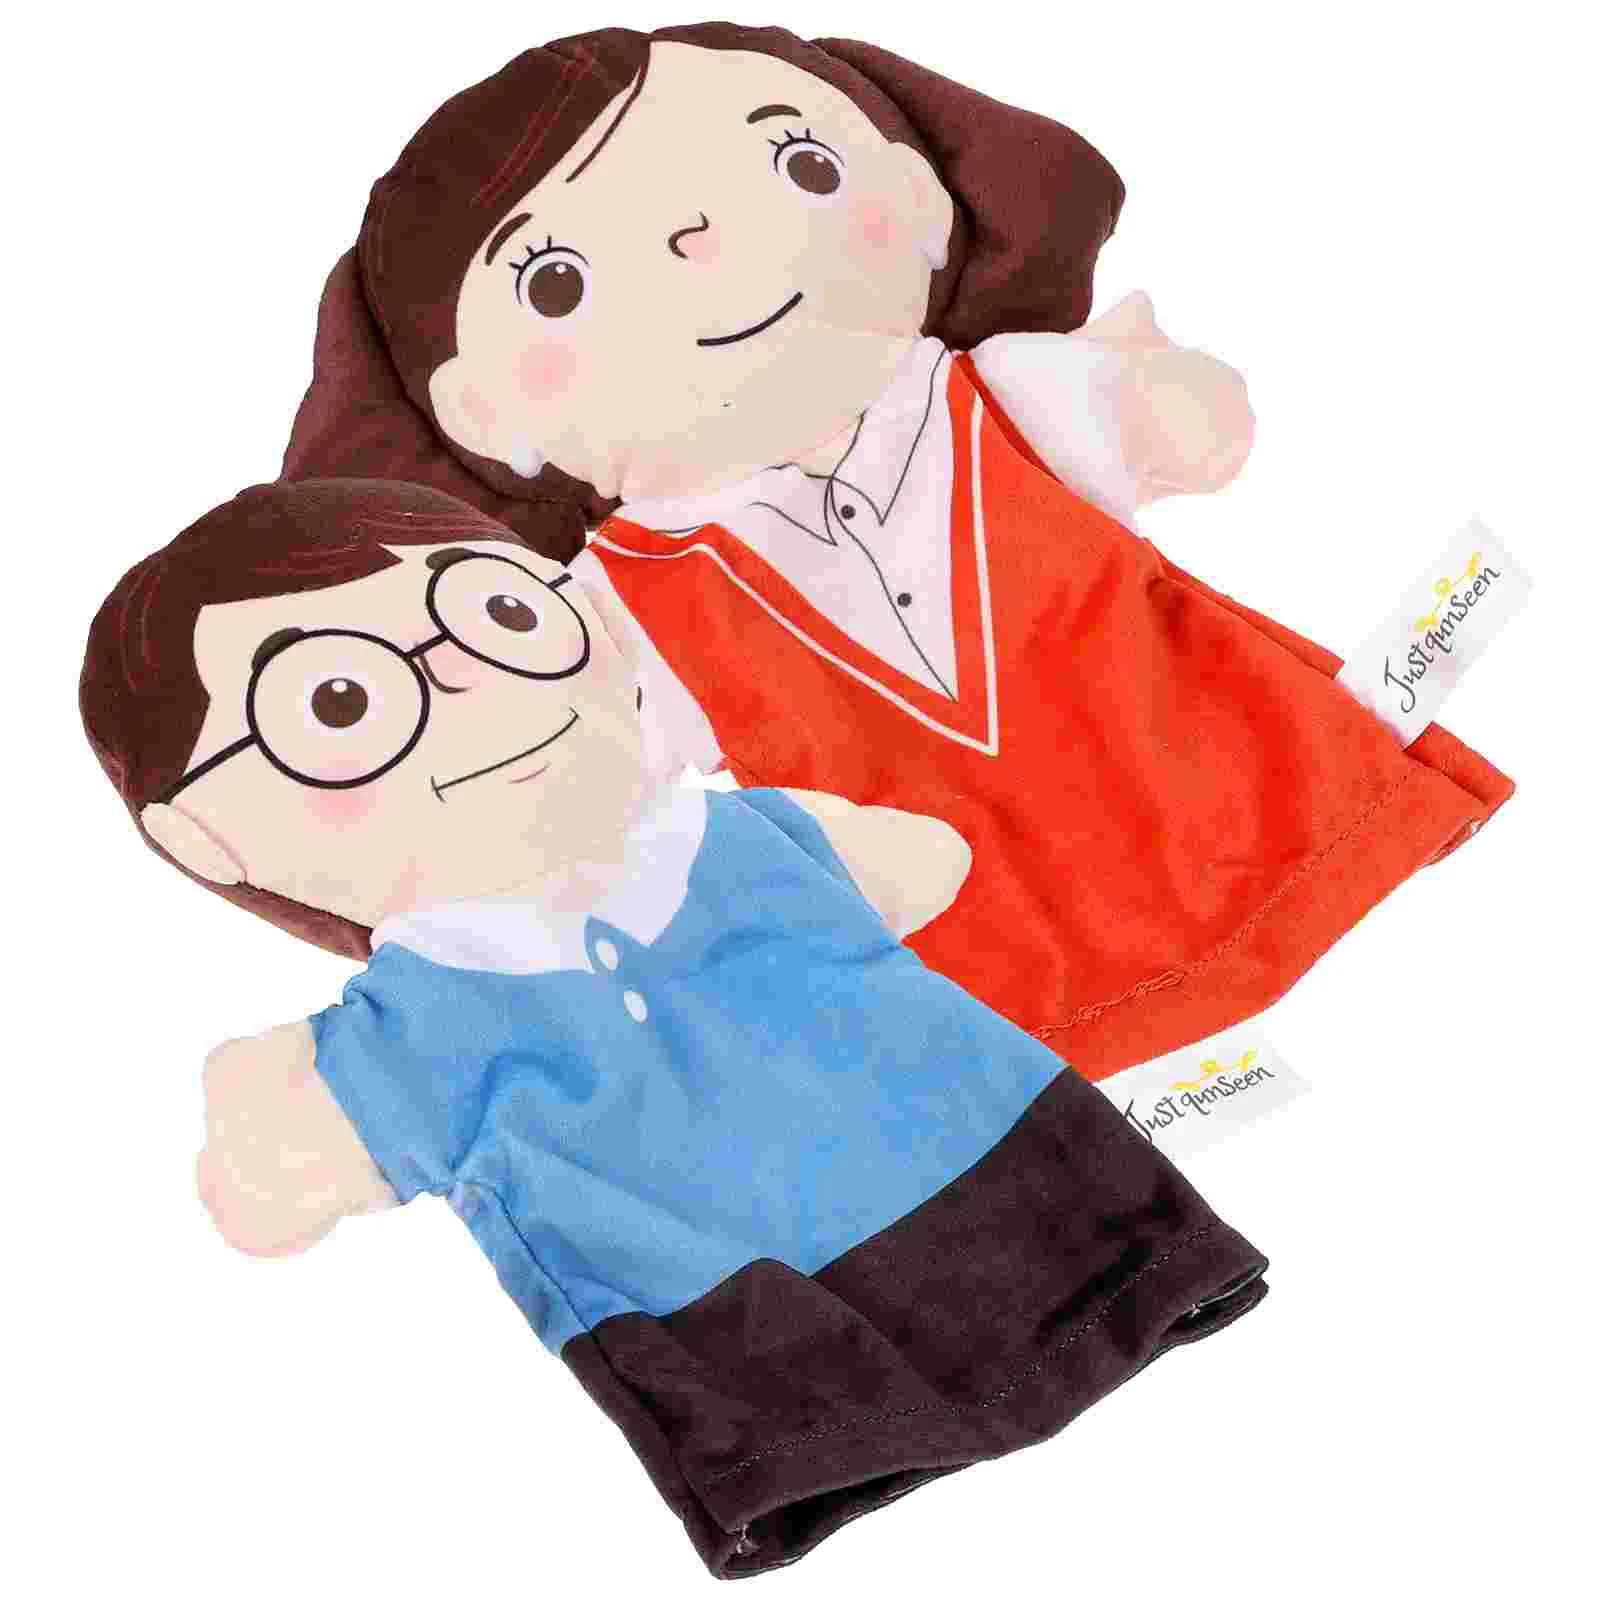 

2 Pcs Character Hand Puppet Creative Toy for Story Telling Puppets Kids Figure Adults Cotton Realistic Parent-child Toys